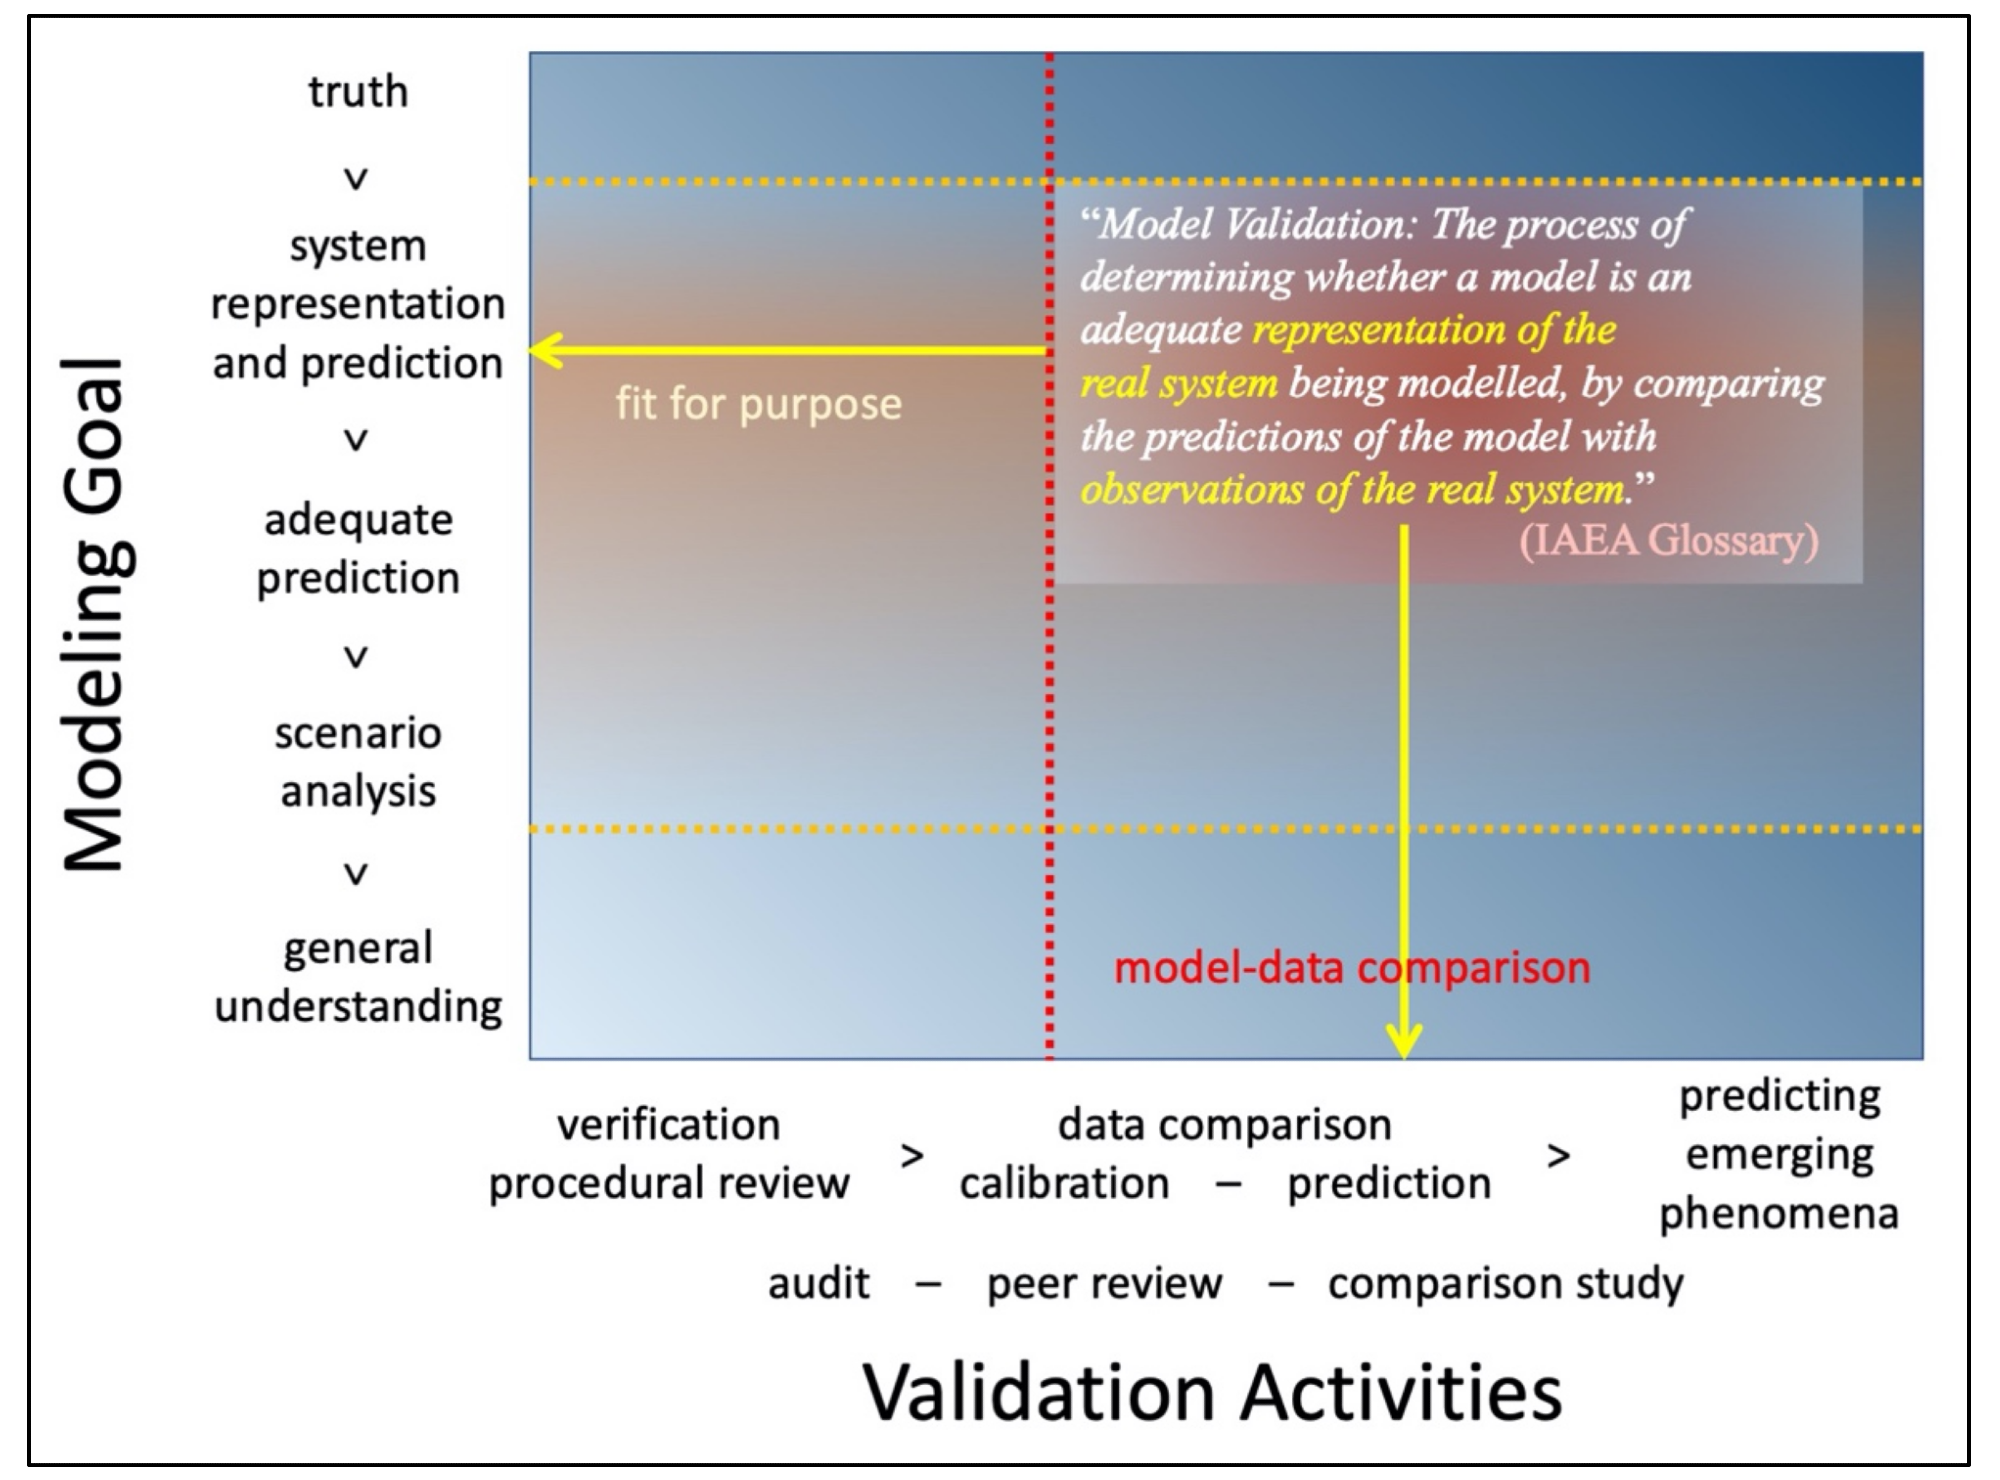 Approximate relation between validation activities needed to reach a particular validation goal. The yellow and red dotted lines indicate, respectively, the modeling goals and validation activities targeted by pragmatic model validation and the relation to the main goal and activity highlighted in the IAEA definition of model validation.